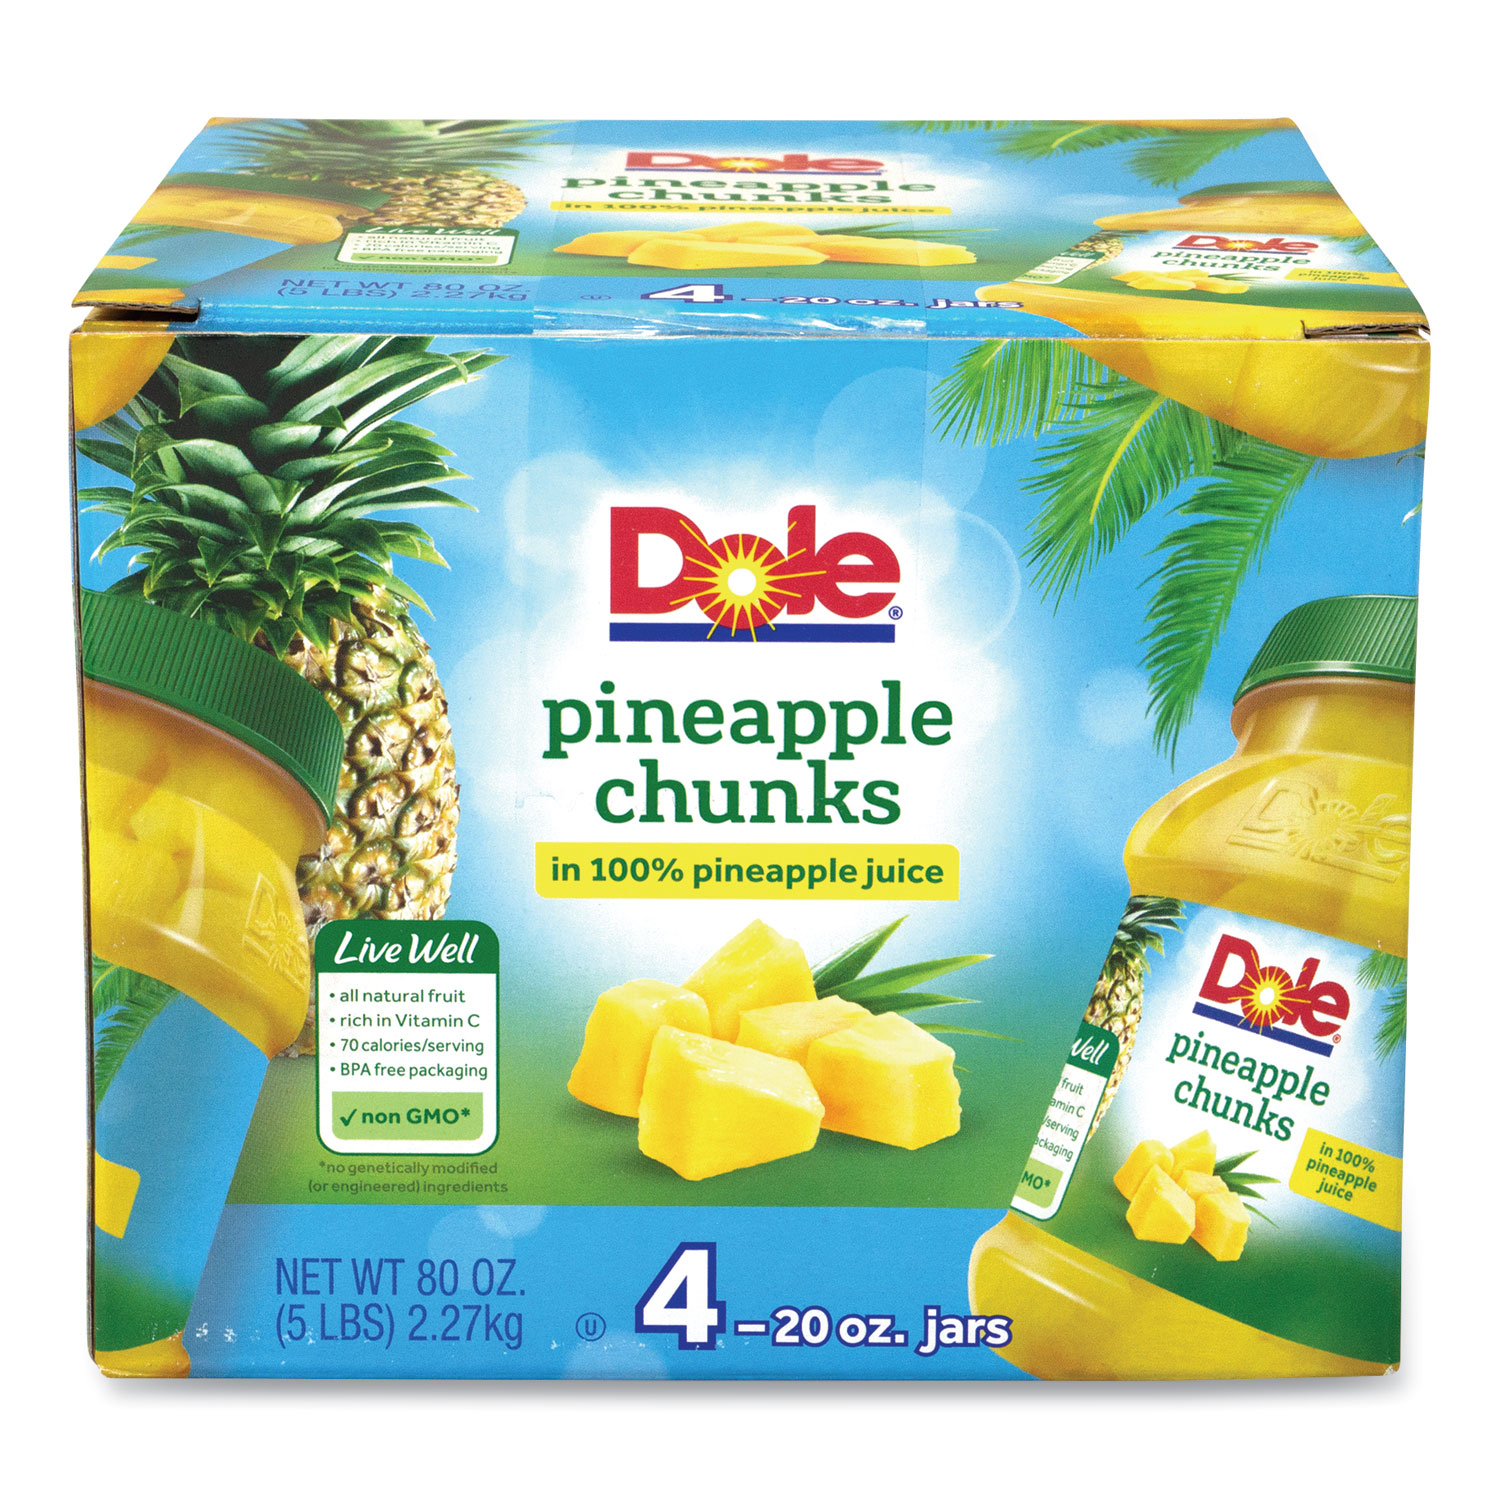 Dole® Pineapple Chunks in 100% Juice, 20 oz Jar, 4 Jars/Box, Free Delivery in 1-4 Business Days